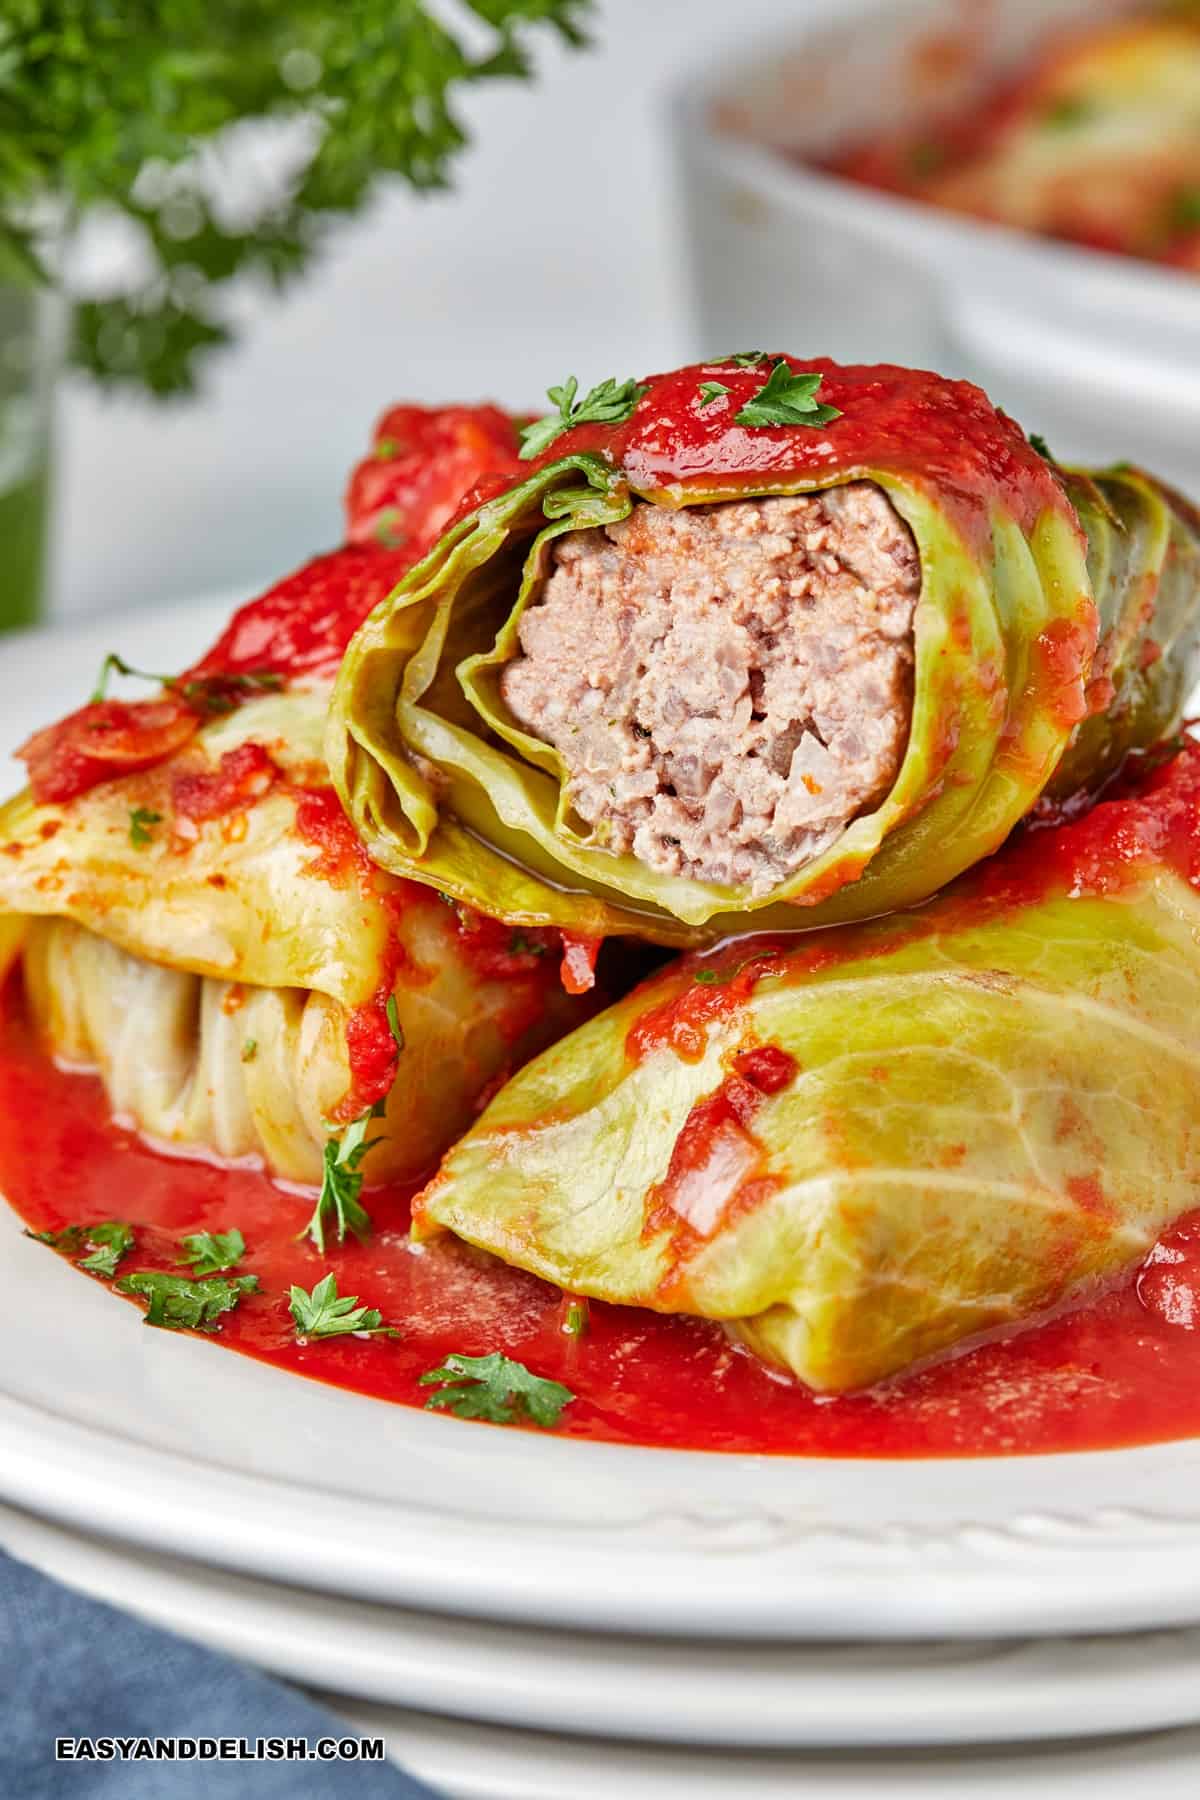 A pile of Polish stuffed cabbage rolls in a plate with a pool of tomato sauce.